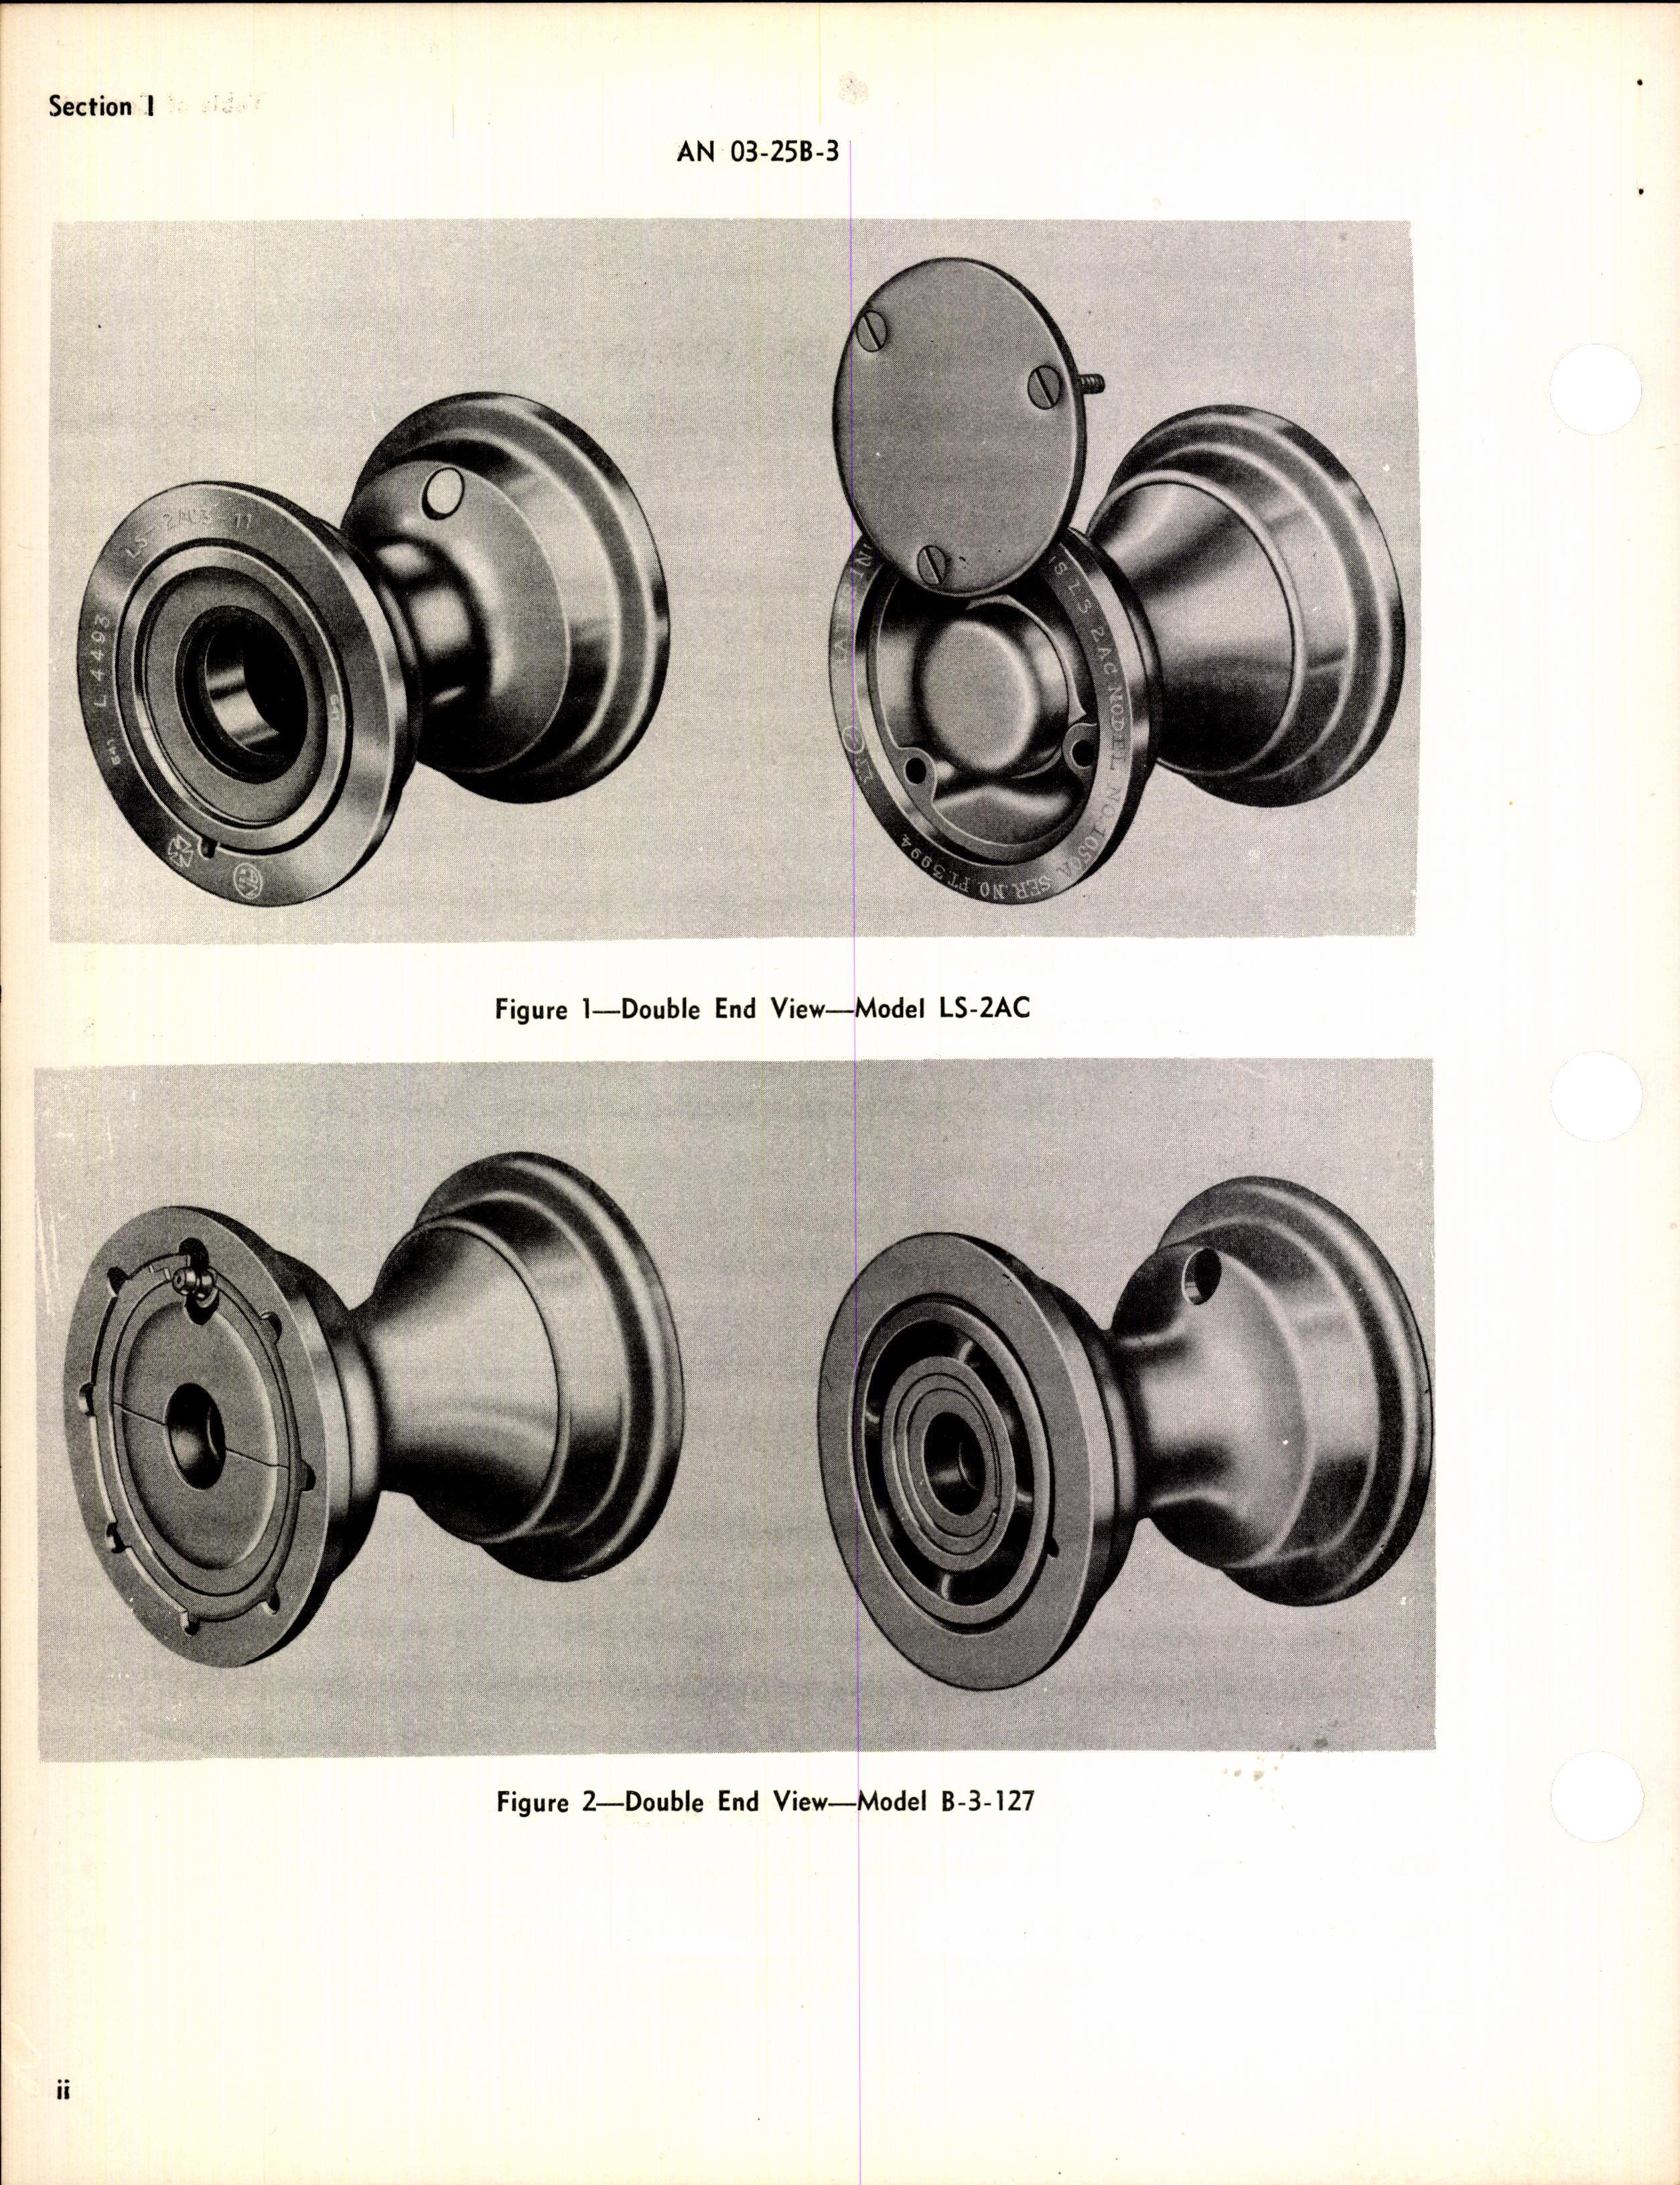 Sample page 4 from AirCorps Library document: Handbook of Instructions with Parts Catalog for Hays Nose and Tail Wheels